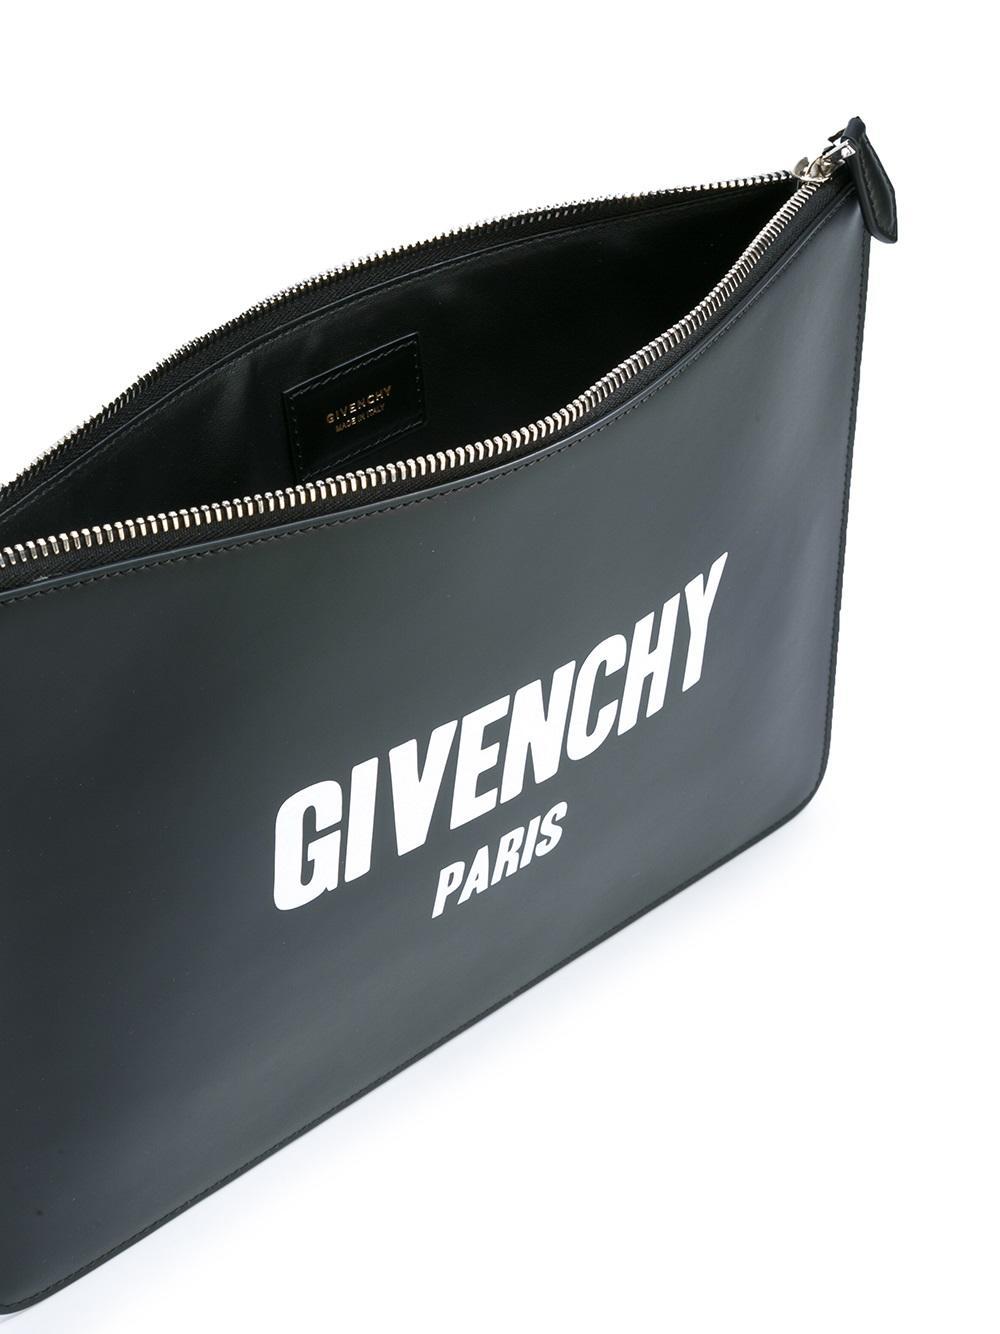 Givenchy Leather Paris Logo Print Clutch in Black | Lyst